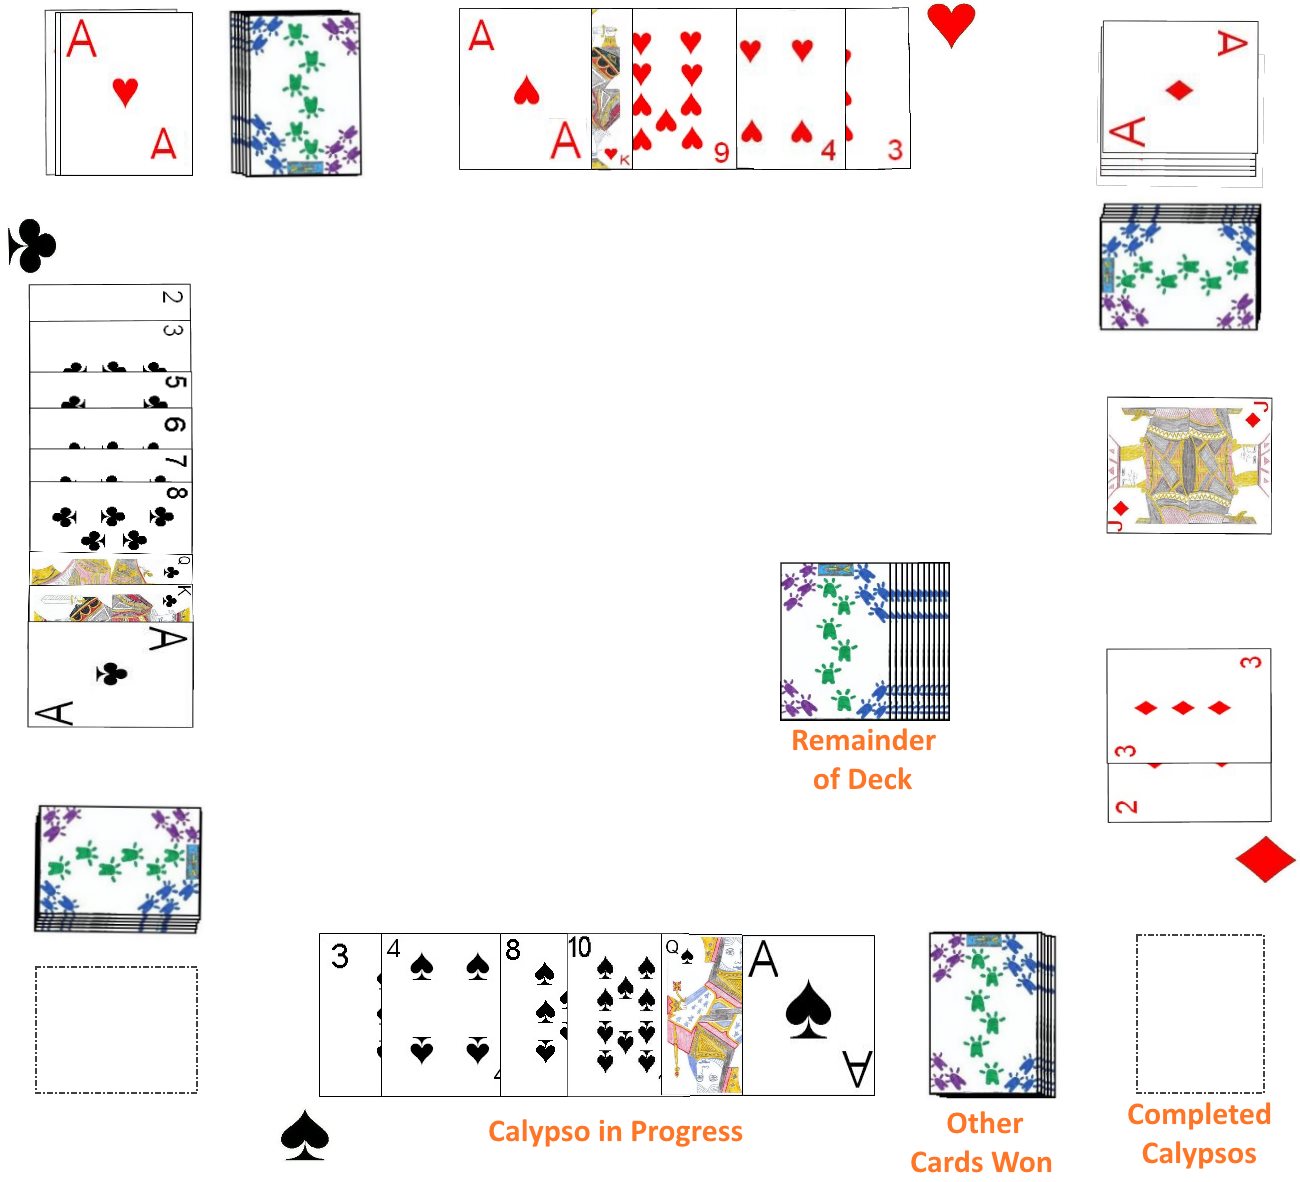 Sample layout for a game of Calypso in progress